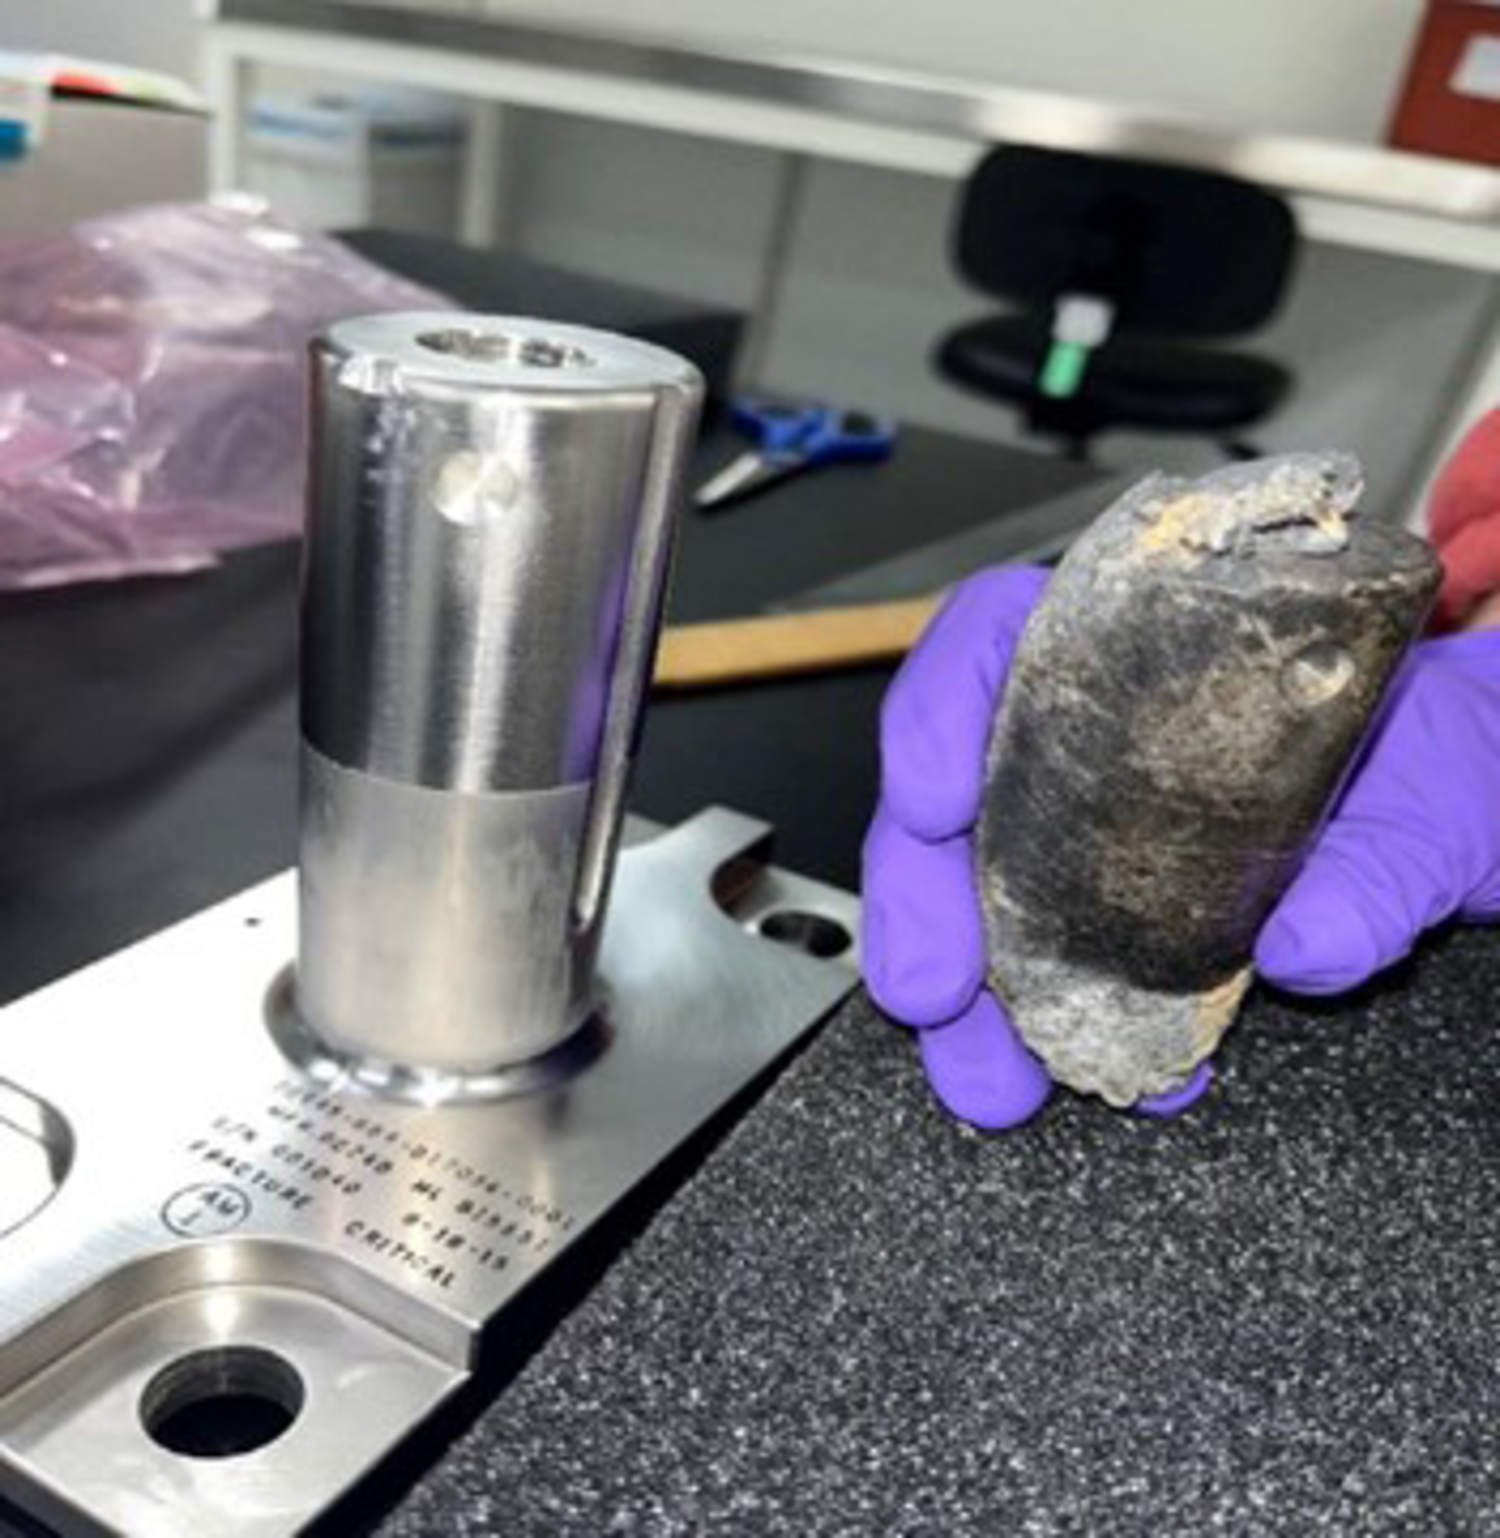 A chunk of space debris found in N.C. came from a SpaceX capsule, NASA says